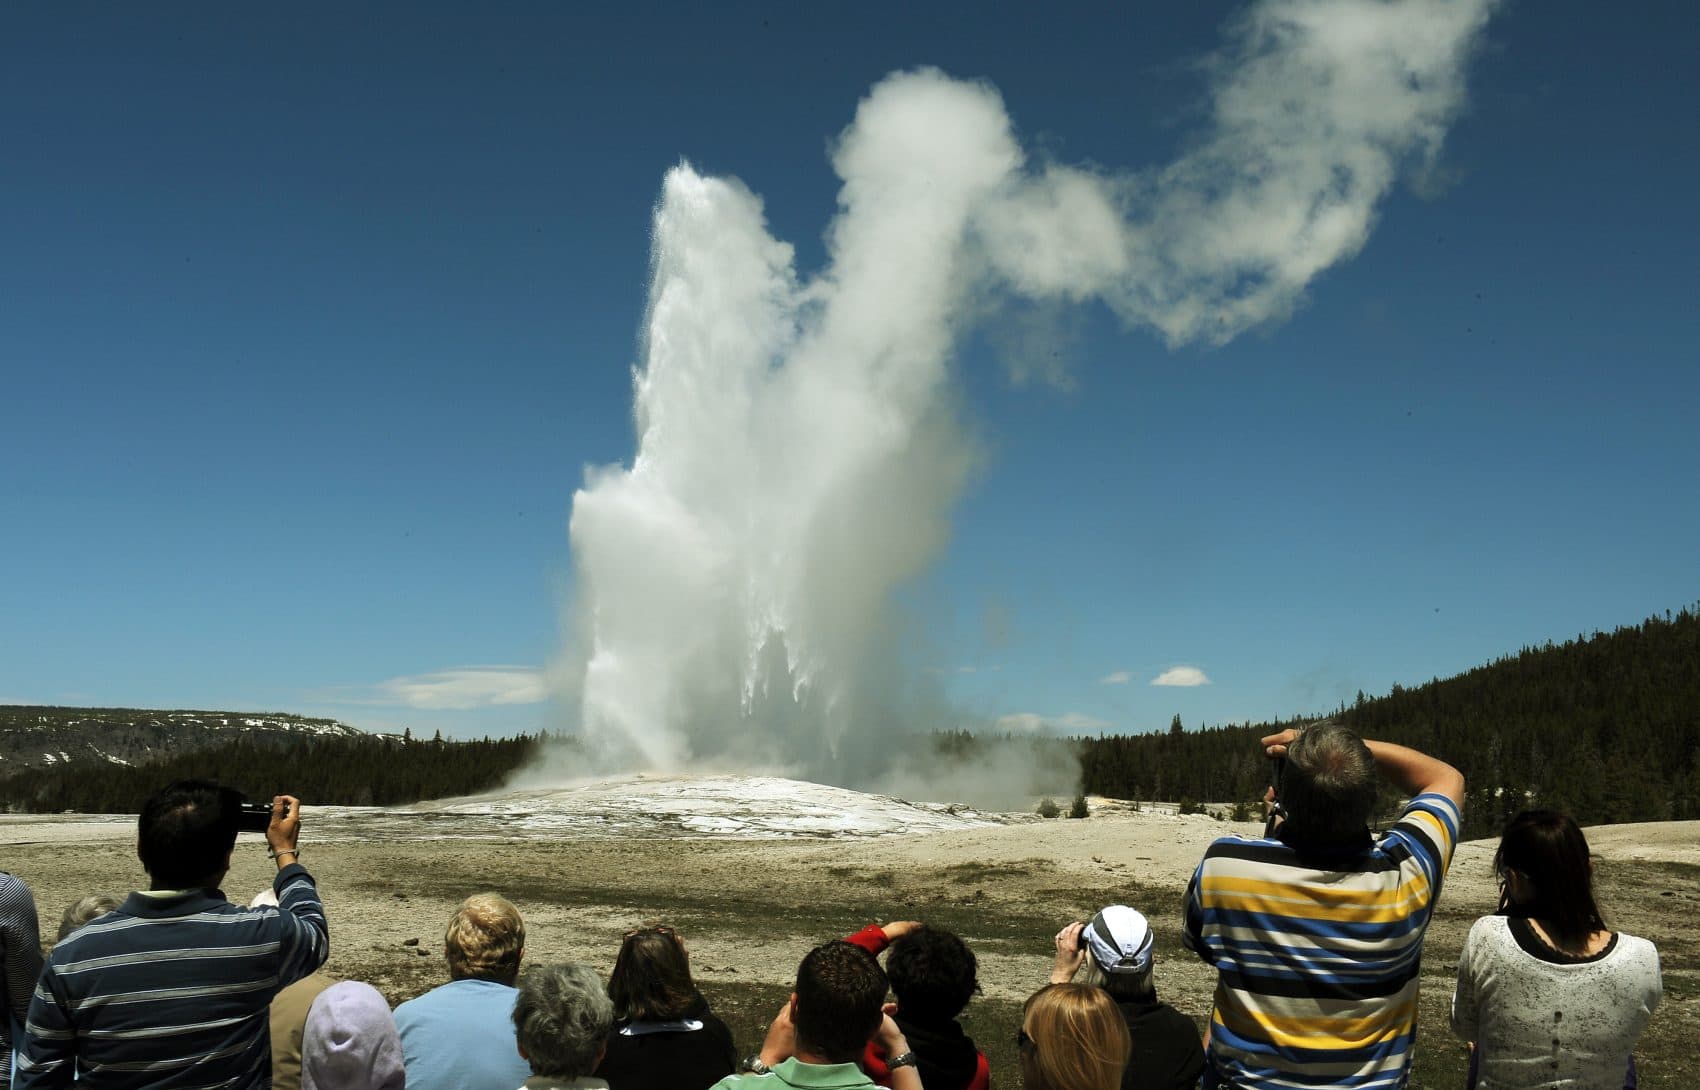 Tourists watch the &quot;Old Faithful&quot; geyser, which erupts on average every 90 minutes, at Yellowstone National Park in Wyoming on June 1, 2011. (Mark Ralston/AFP/Getty Images)